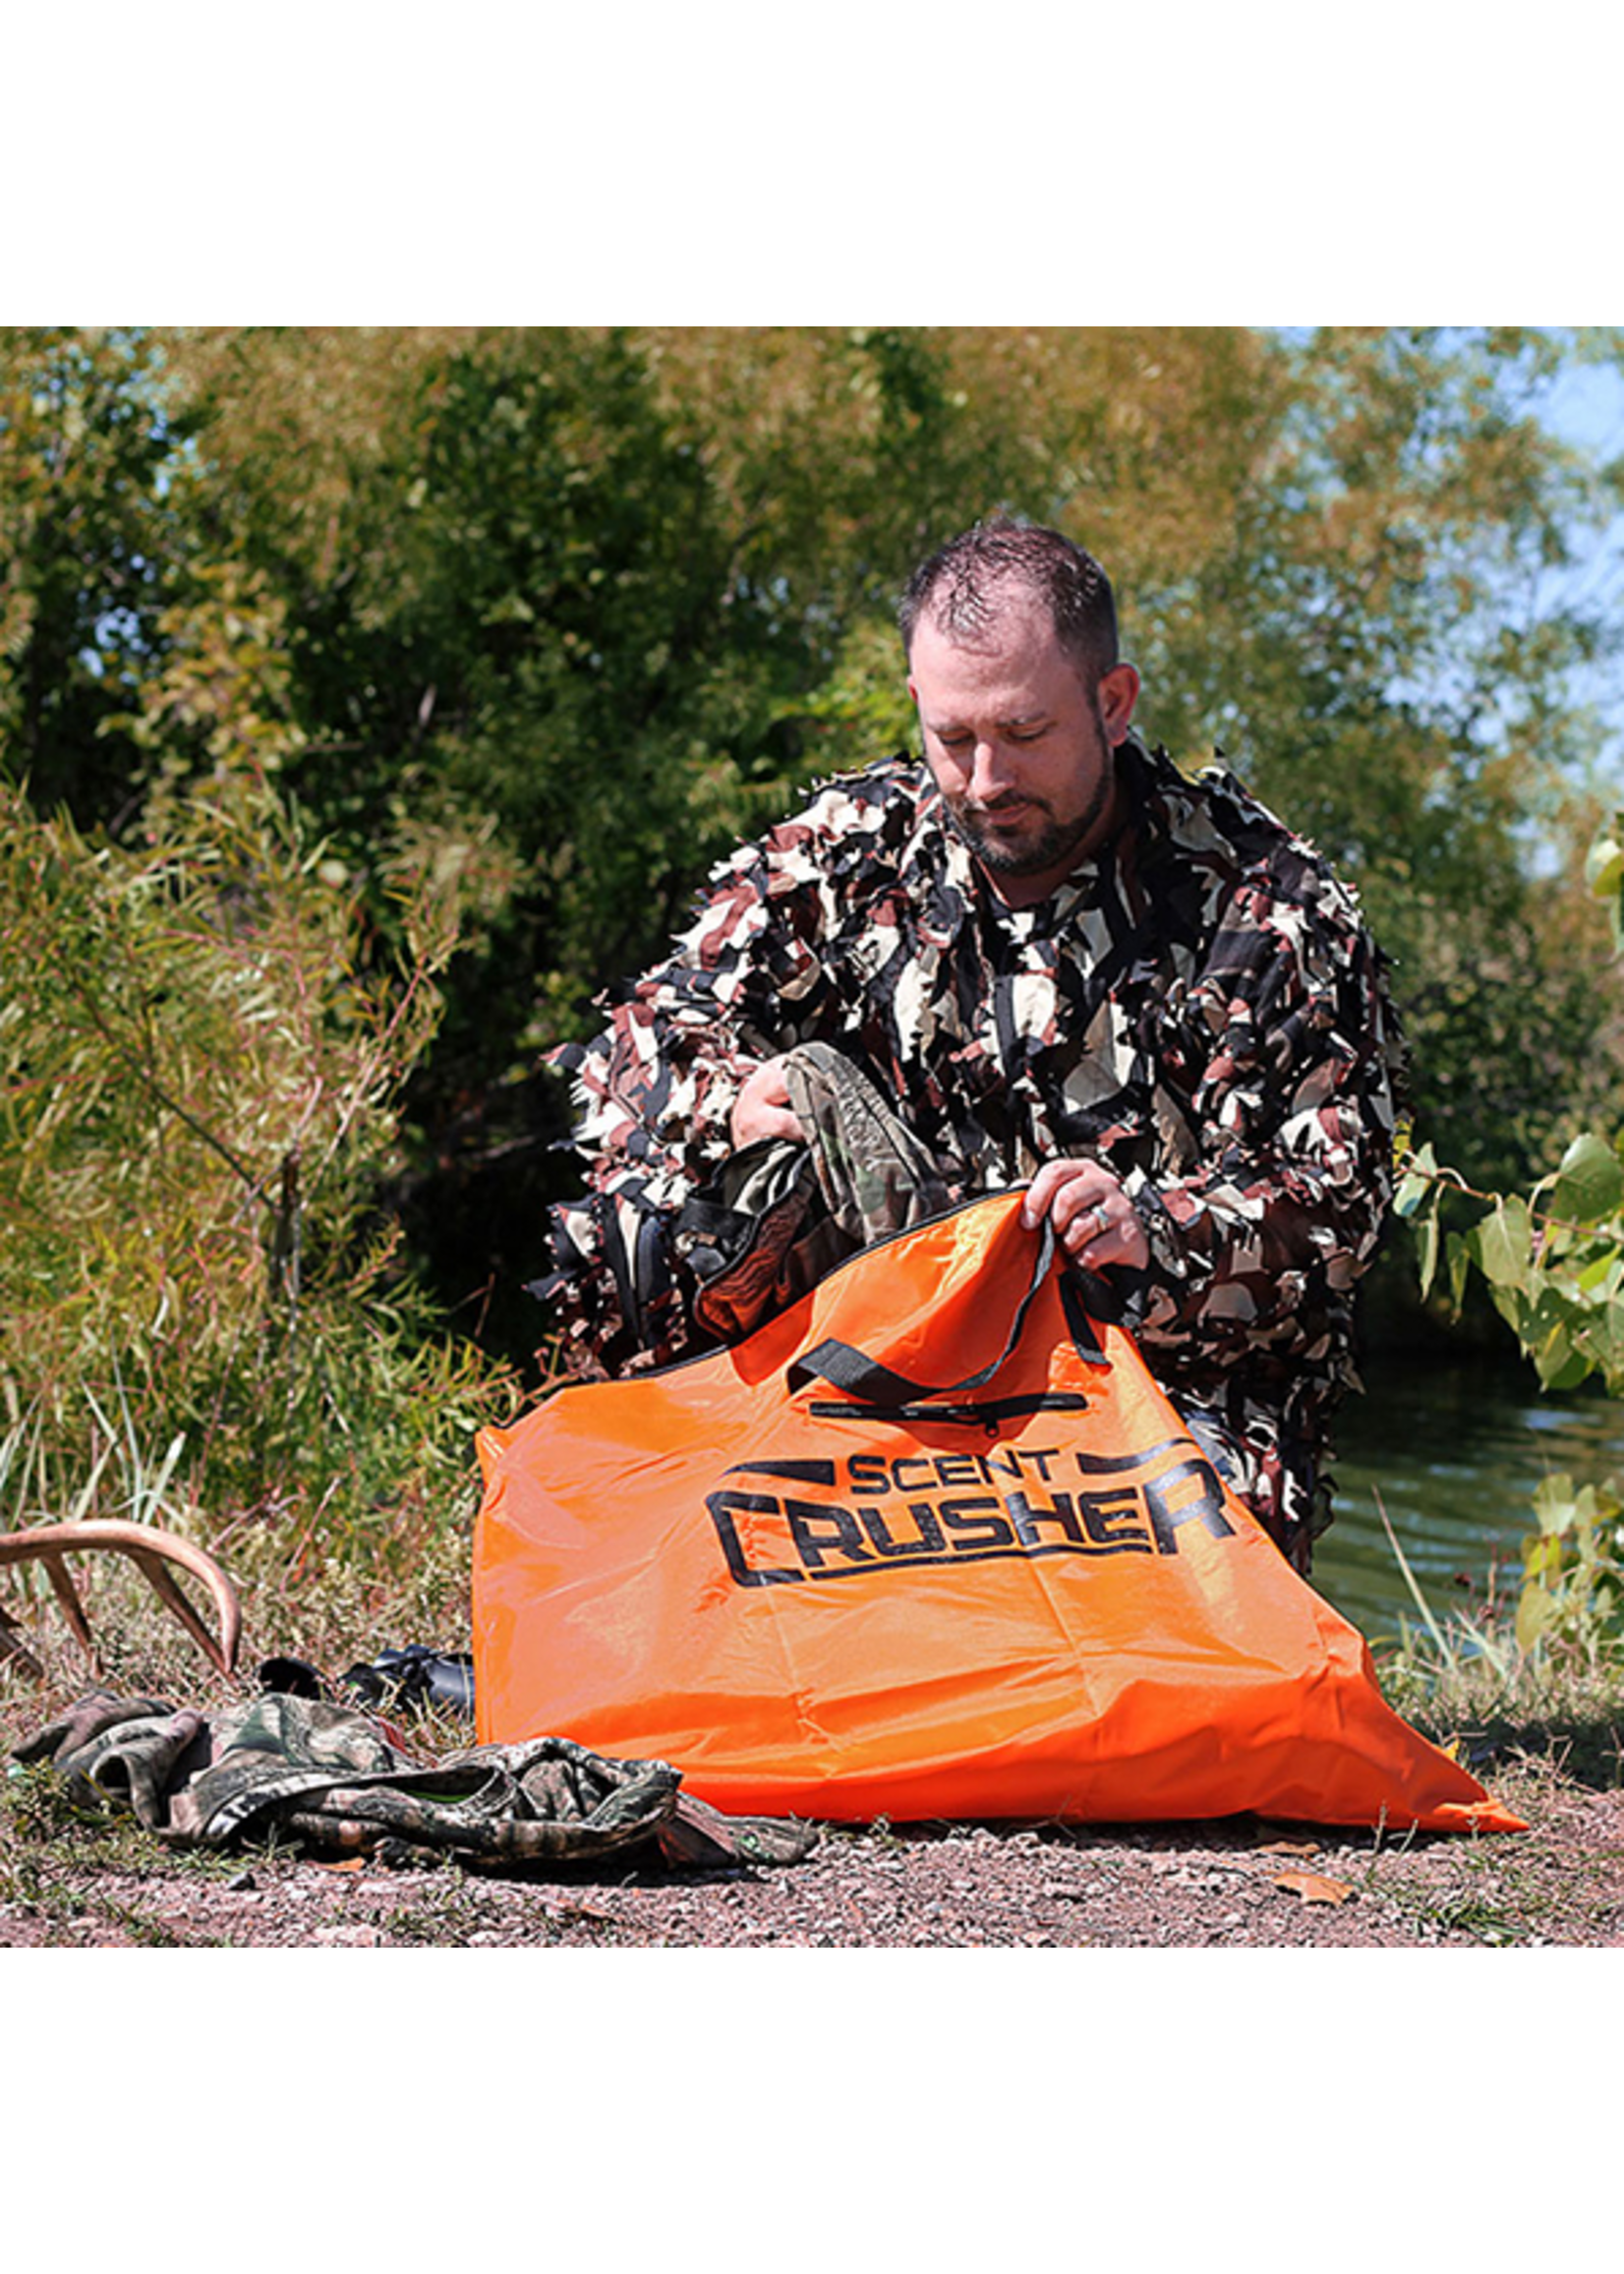 scent crusher scent free material bag